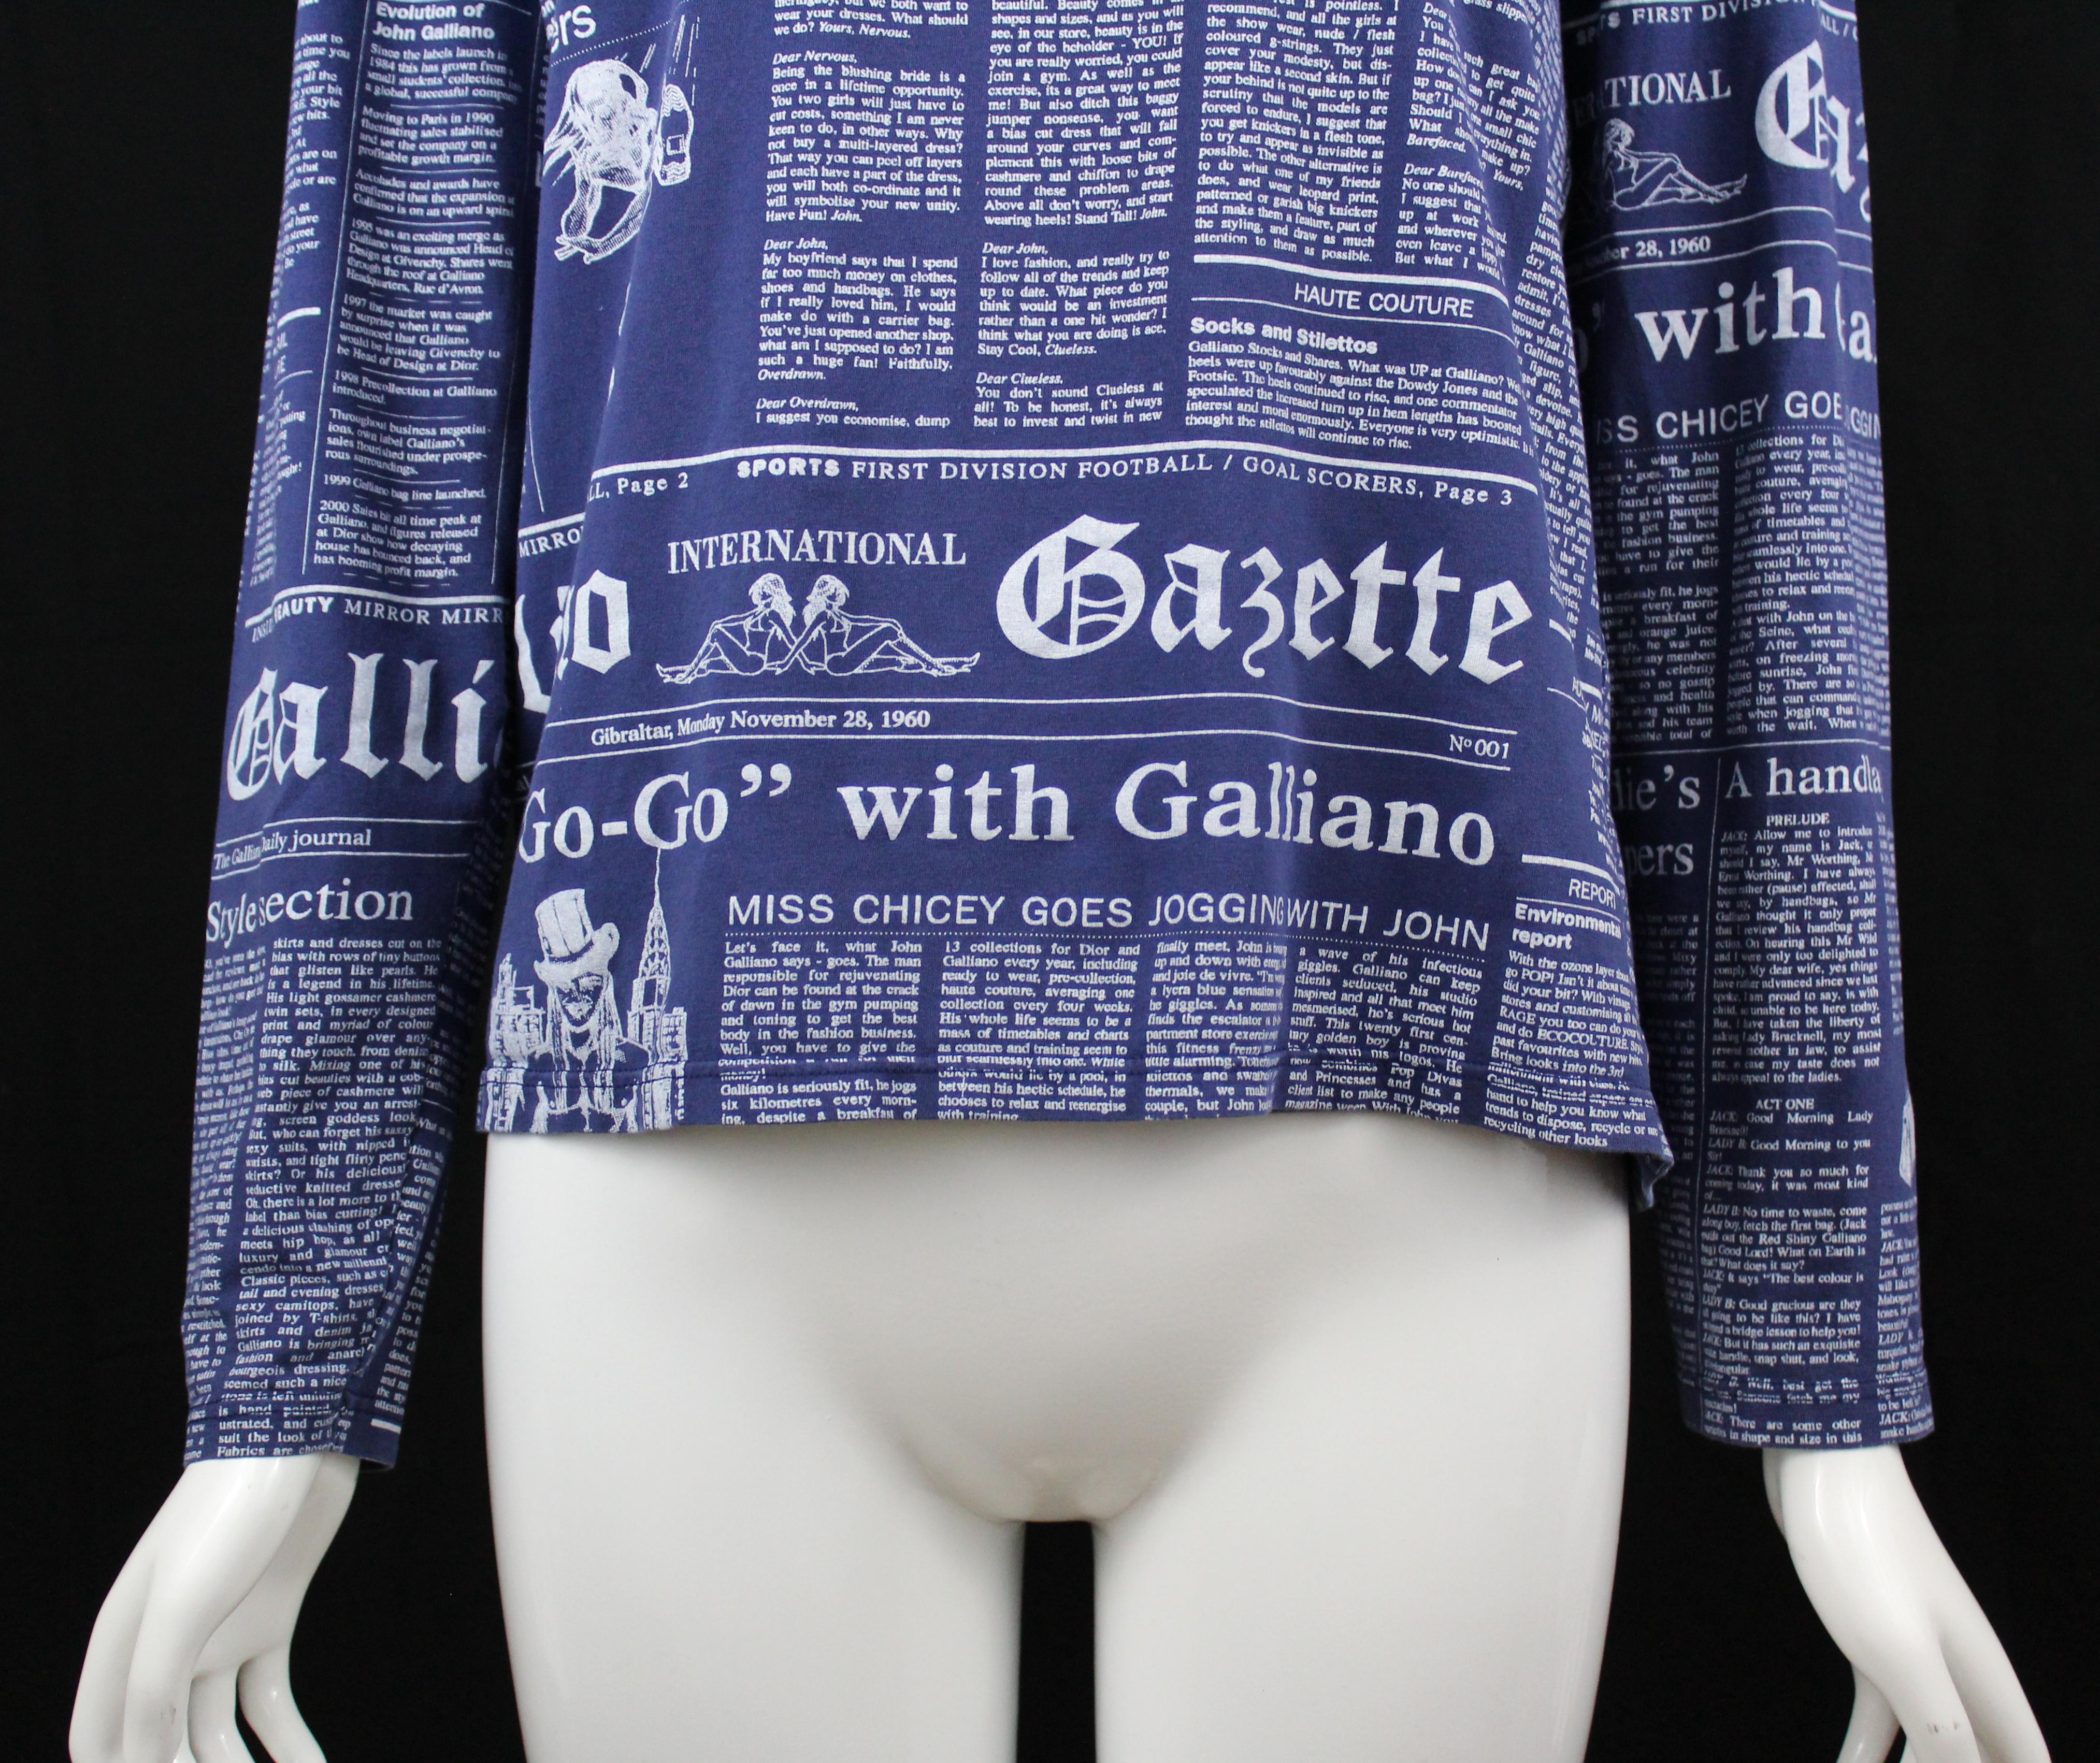 -Galliano newspaper print all over
-Blue cotton with white font
-Sized S
-Made in Italy
-Has stretch 

Measurements
-length : 23
-bust : 18
-sleeve  length: 24

Condition:
-Excellent, 100% authentic.
